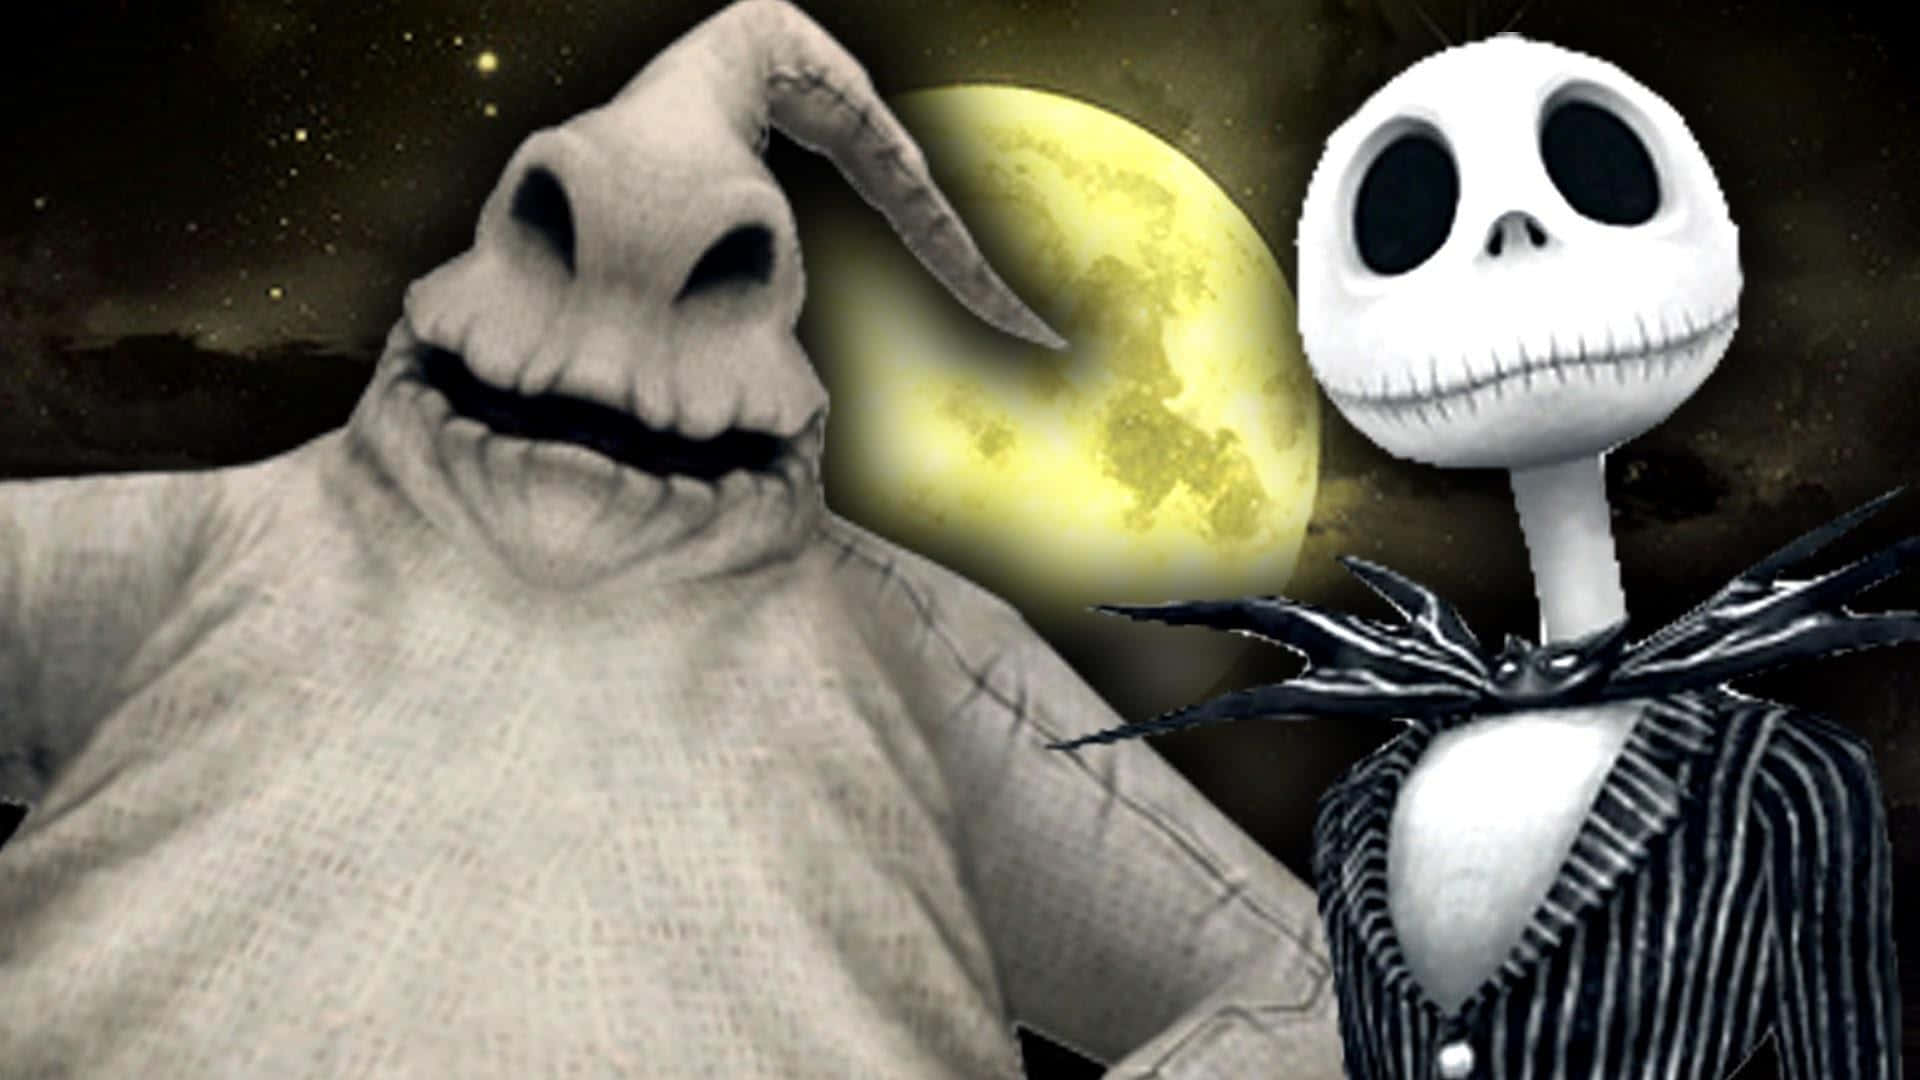 Oogieboogie Jack Skellington Refers To Characters From The Movie 